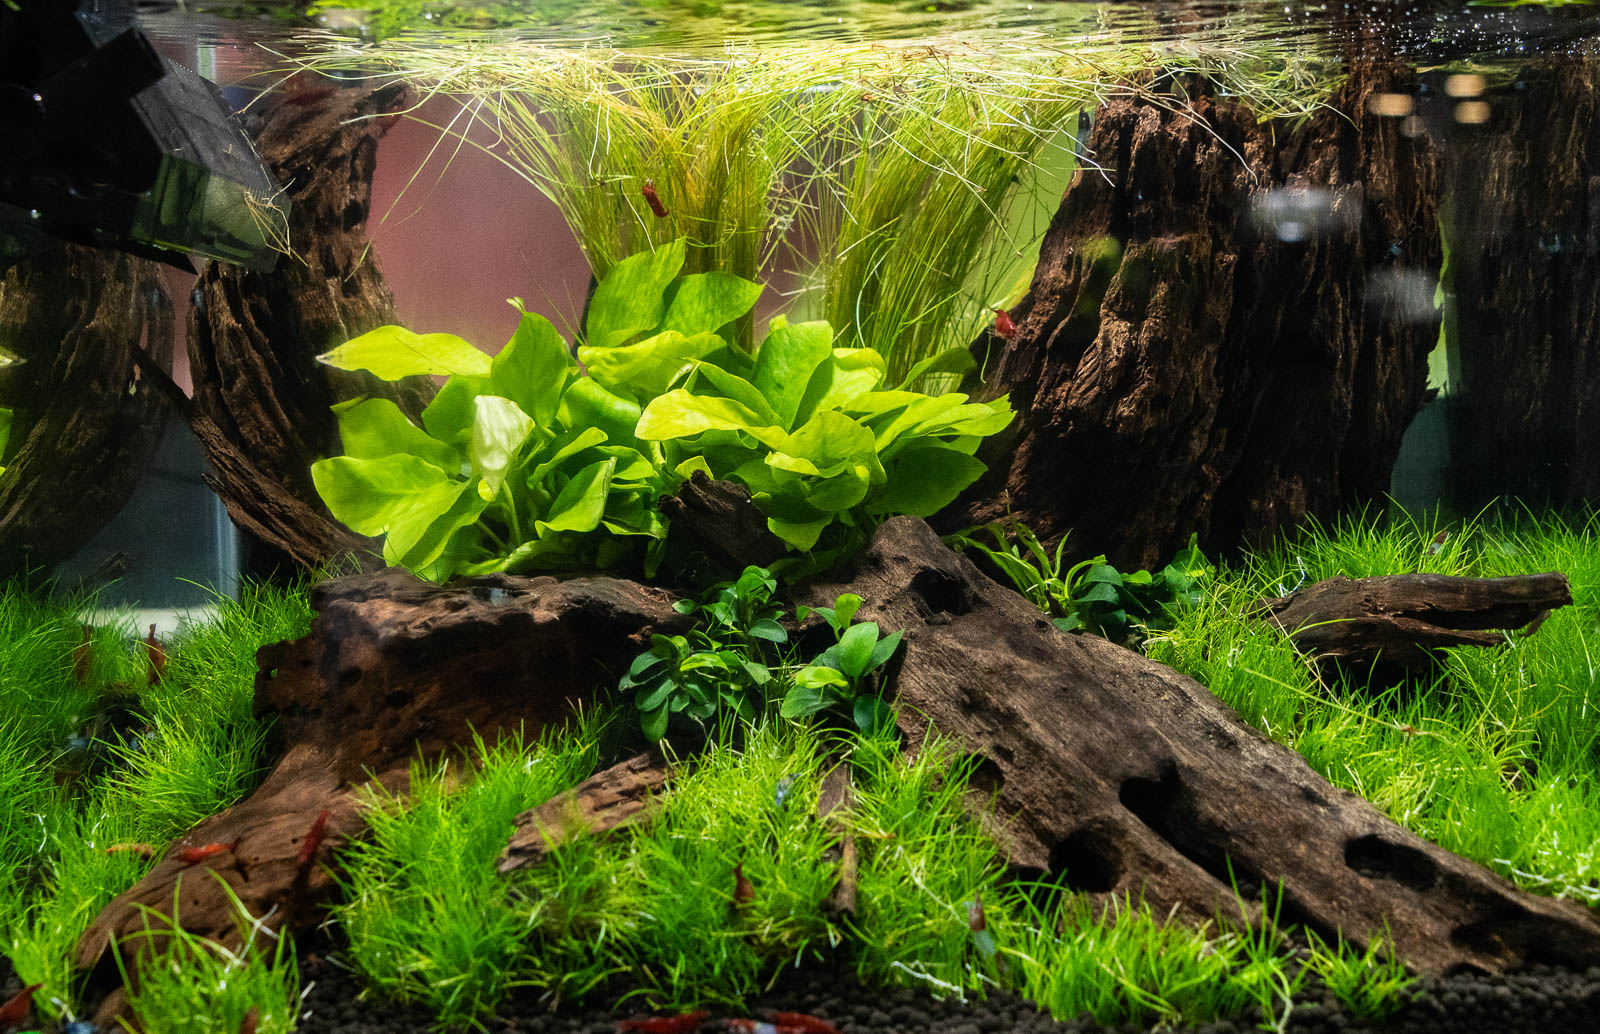 Pimp your fish tank: The wonders of competitive aquascaping